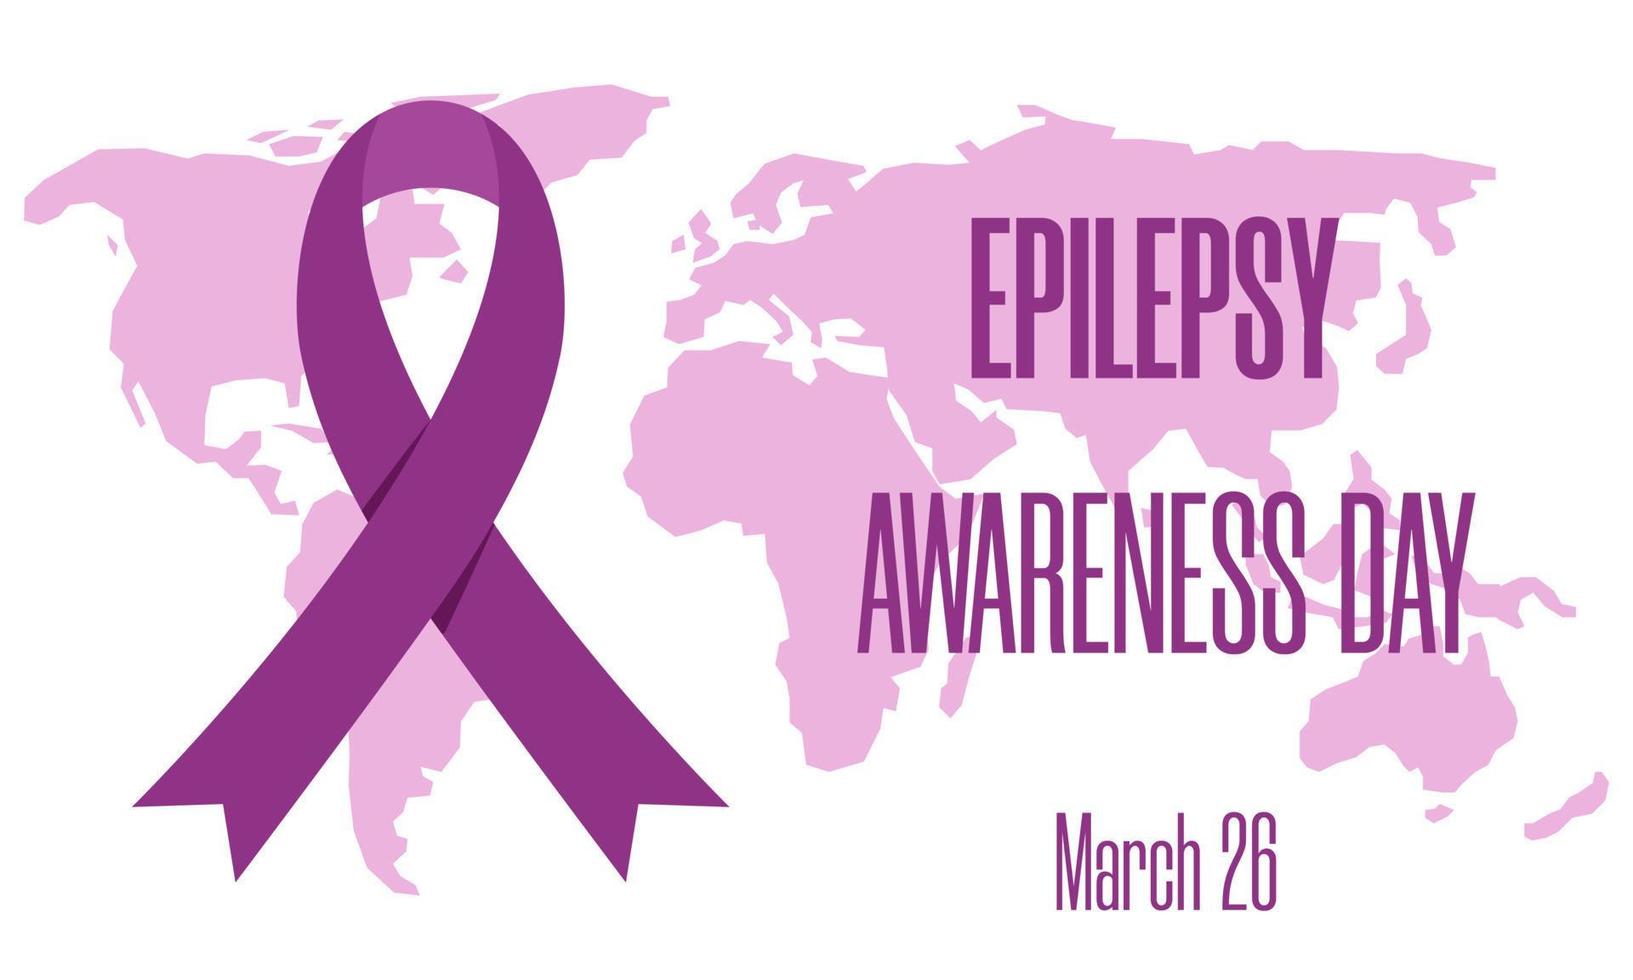 Concept of Epilepsy awareness day, Purple Day on March 26. Vector illustration of world map with awareness ribbon and text for social poster, banner, card, flyer